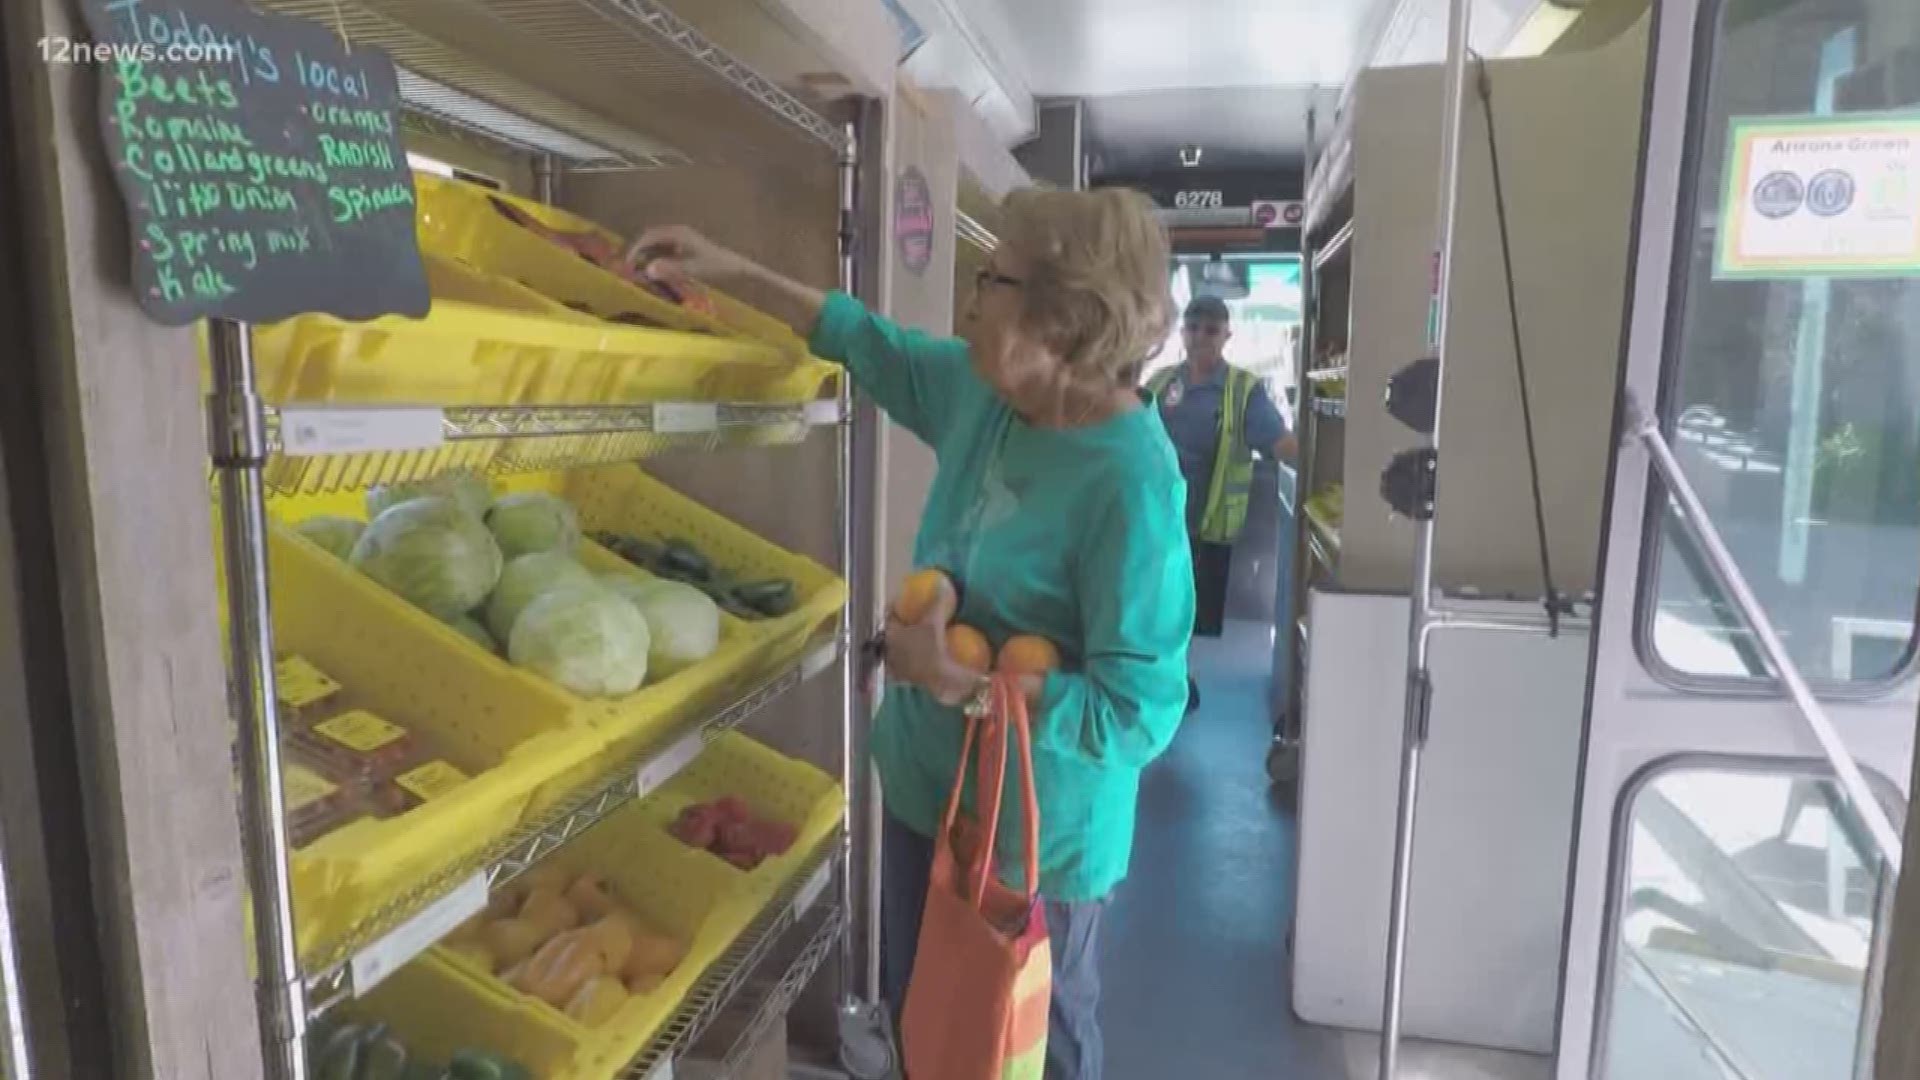 The produce section on wheels aims to bring affordable, healthy food to low-income communities.